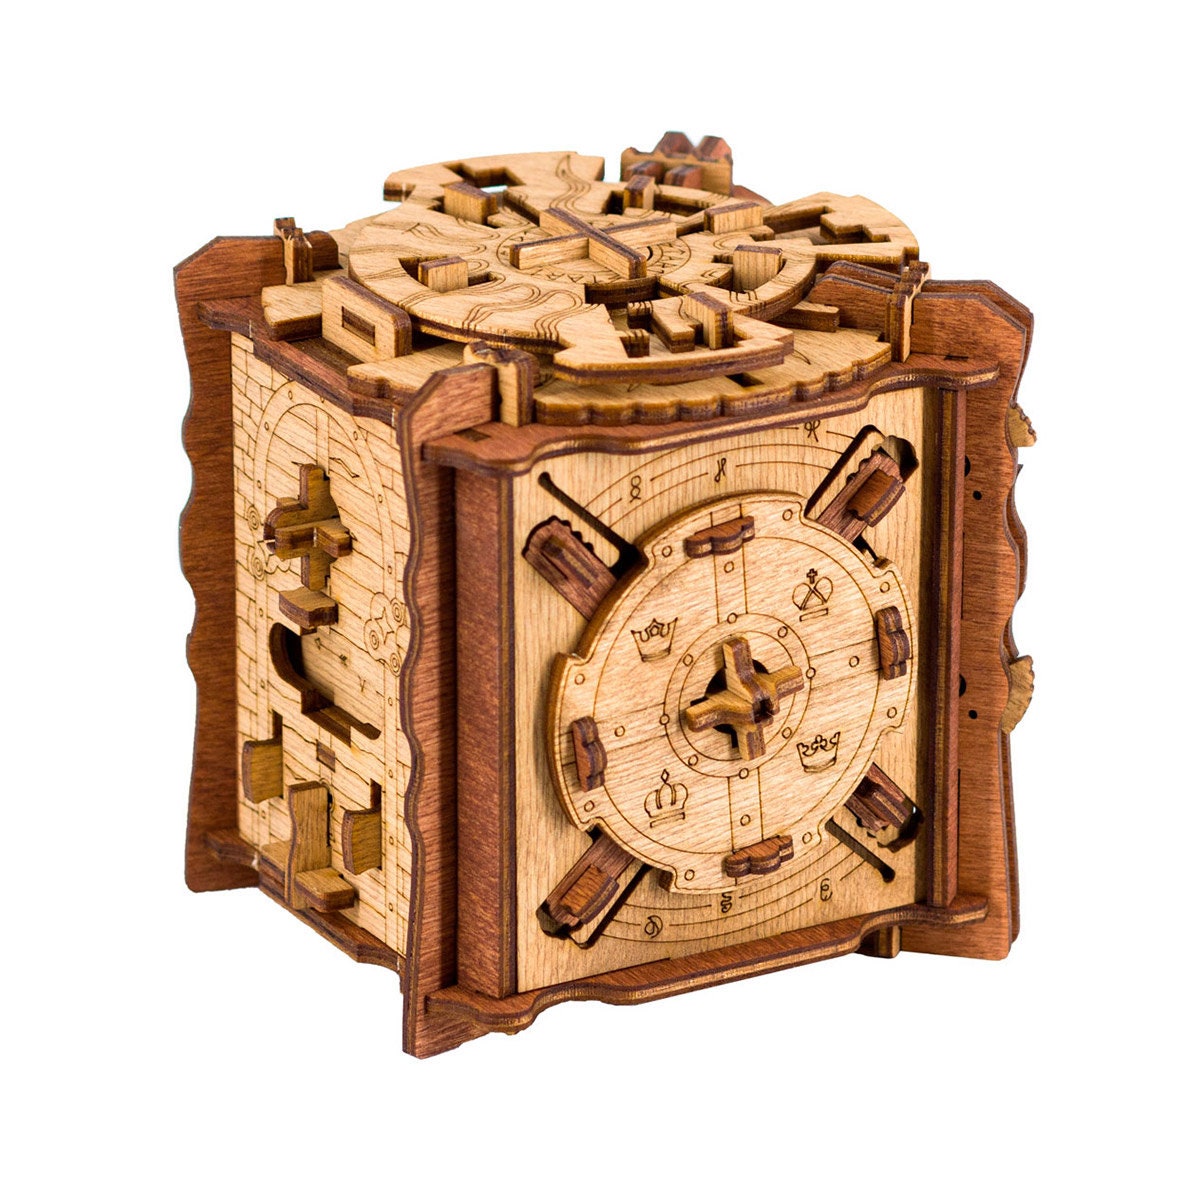 iDventure Cluebox - Davy Jones Locker - Escape Room Game - Puzzle Box -  Gift Box - 3D Wooden Puzzle - Wooden Jigsaw - 3D Puzzles for Adults - Brain  Teaser - Birthday Gift Gadget for Men - Money Box : Toys & Games 